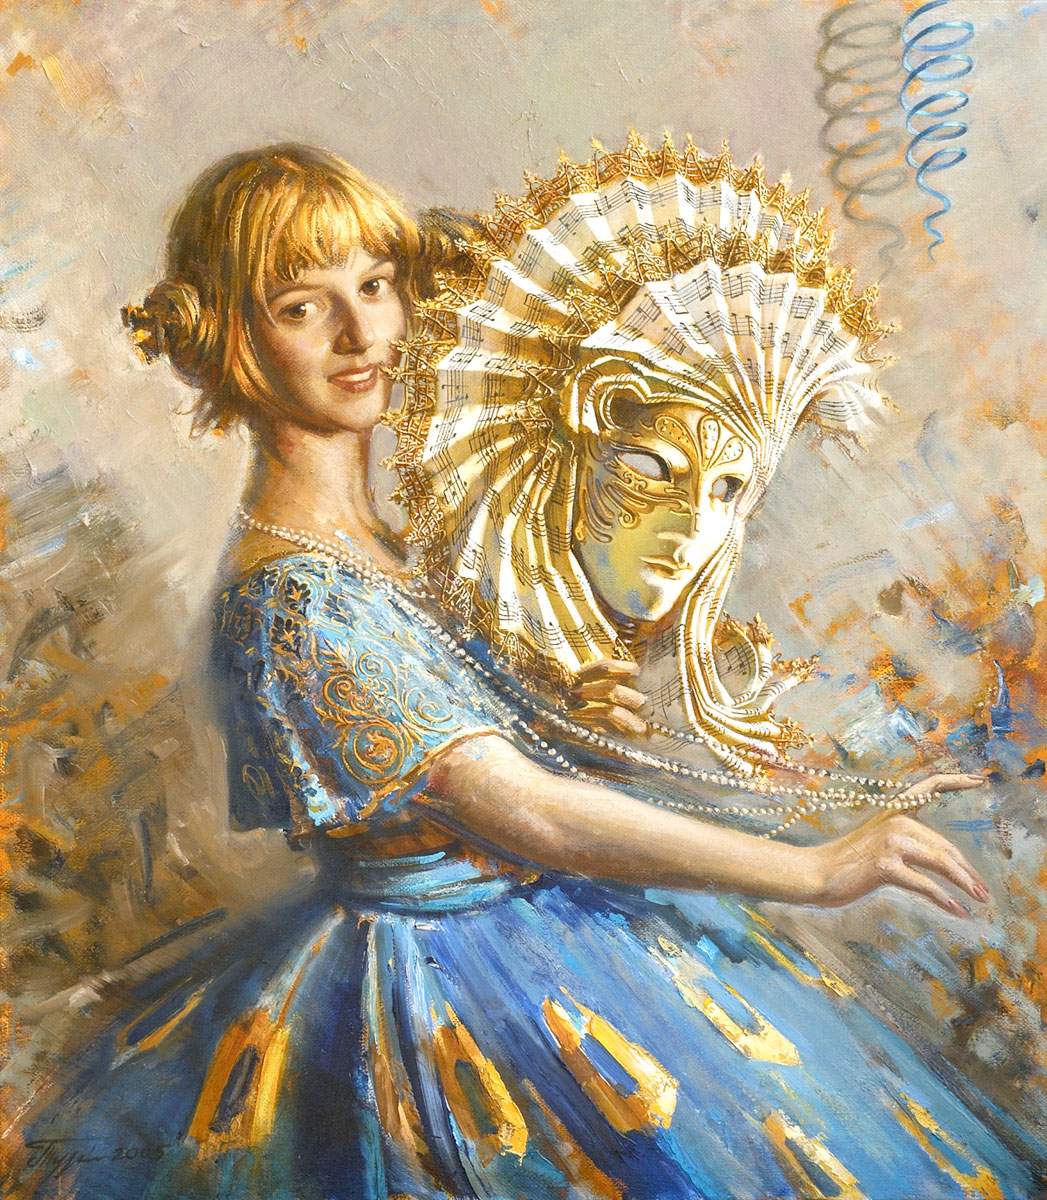 At the Carnival (OLga's portrait), oil on canvas, 47.24"h x35.43"w (120x90cm), 2005